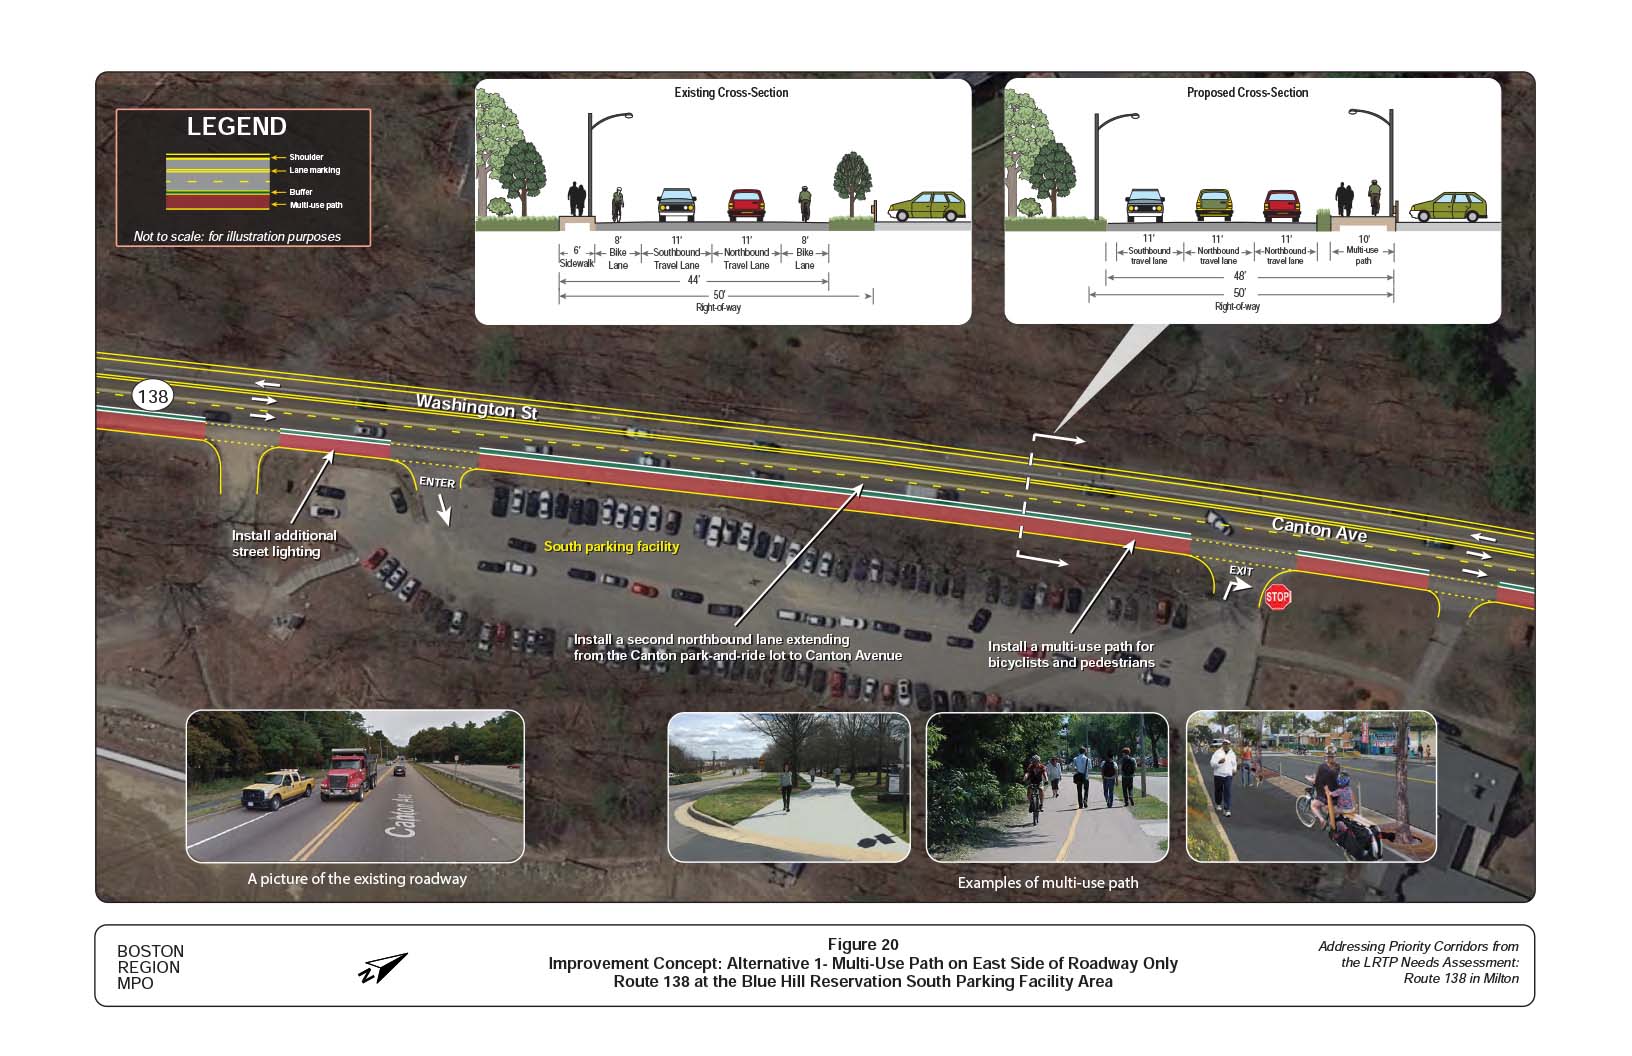 Figure 20 is an aerial of Route 138 at the Blue Hills Reservation south parking facility showing Alternative 1, a multi-use path on the east side of the roadway; and overlays showing the existing and proposed cross-sections.